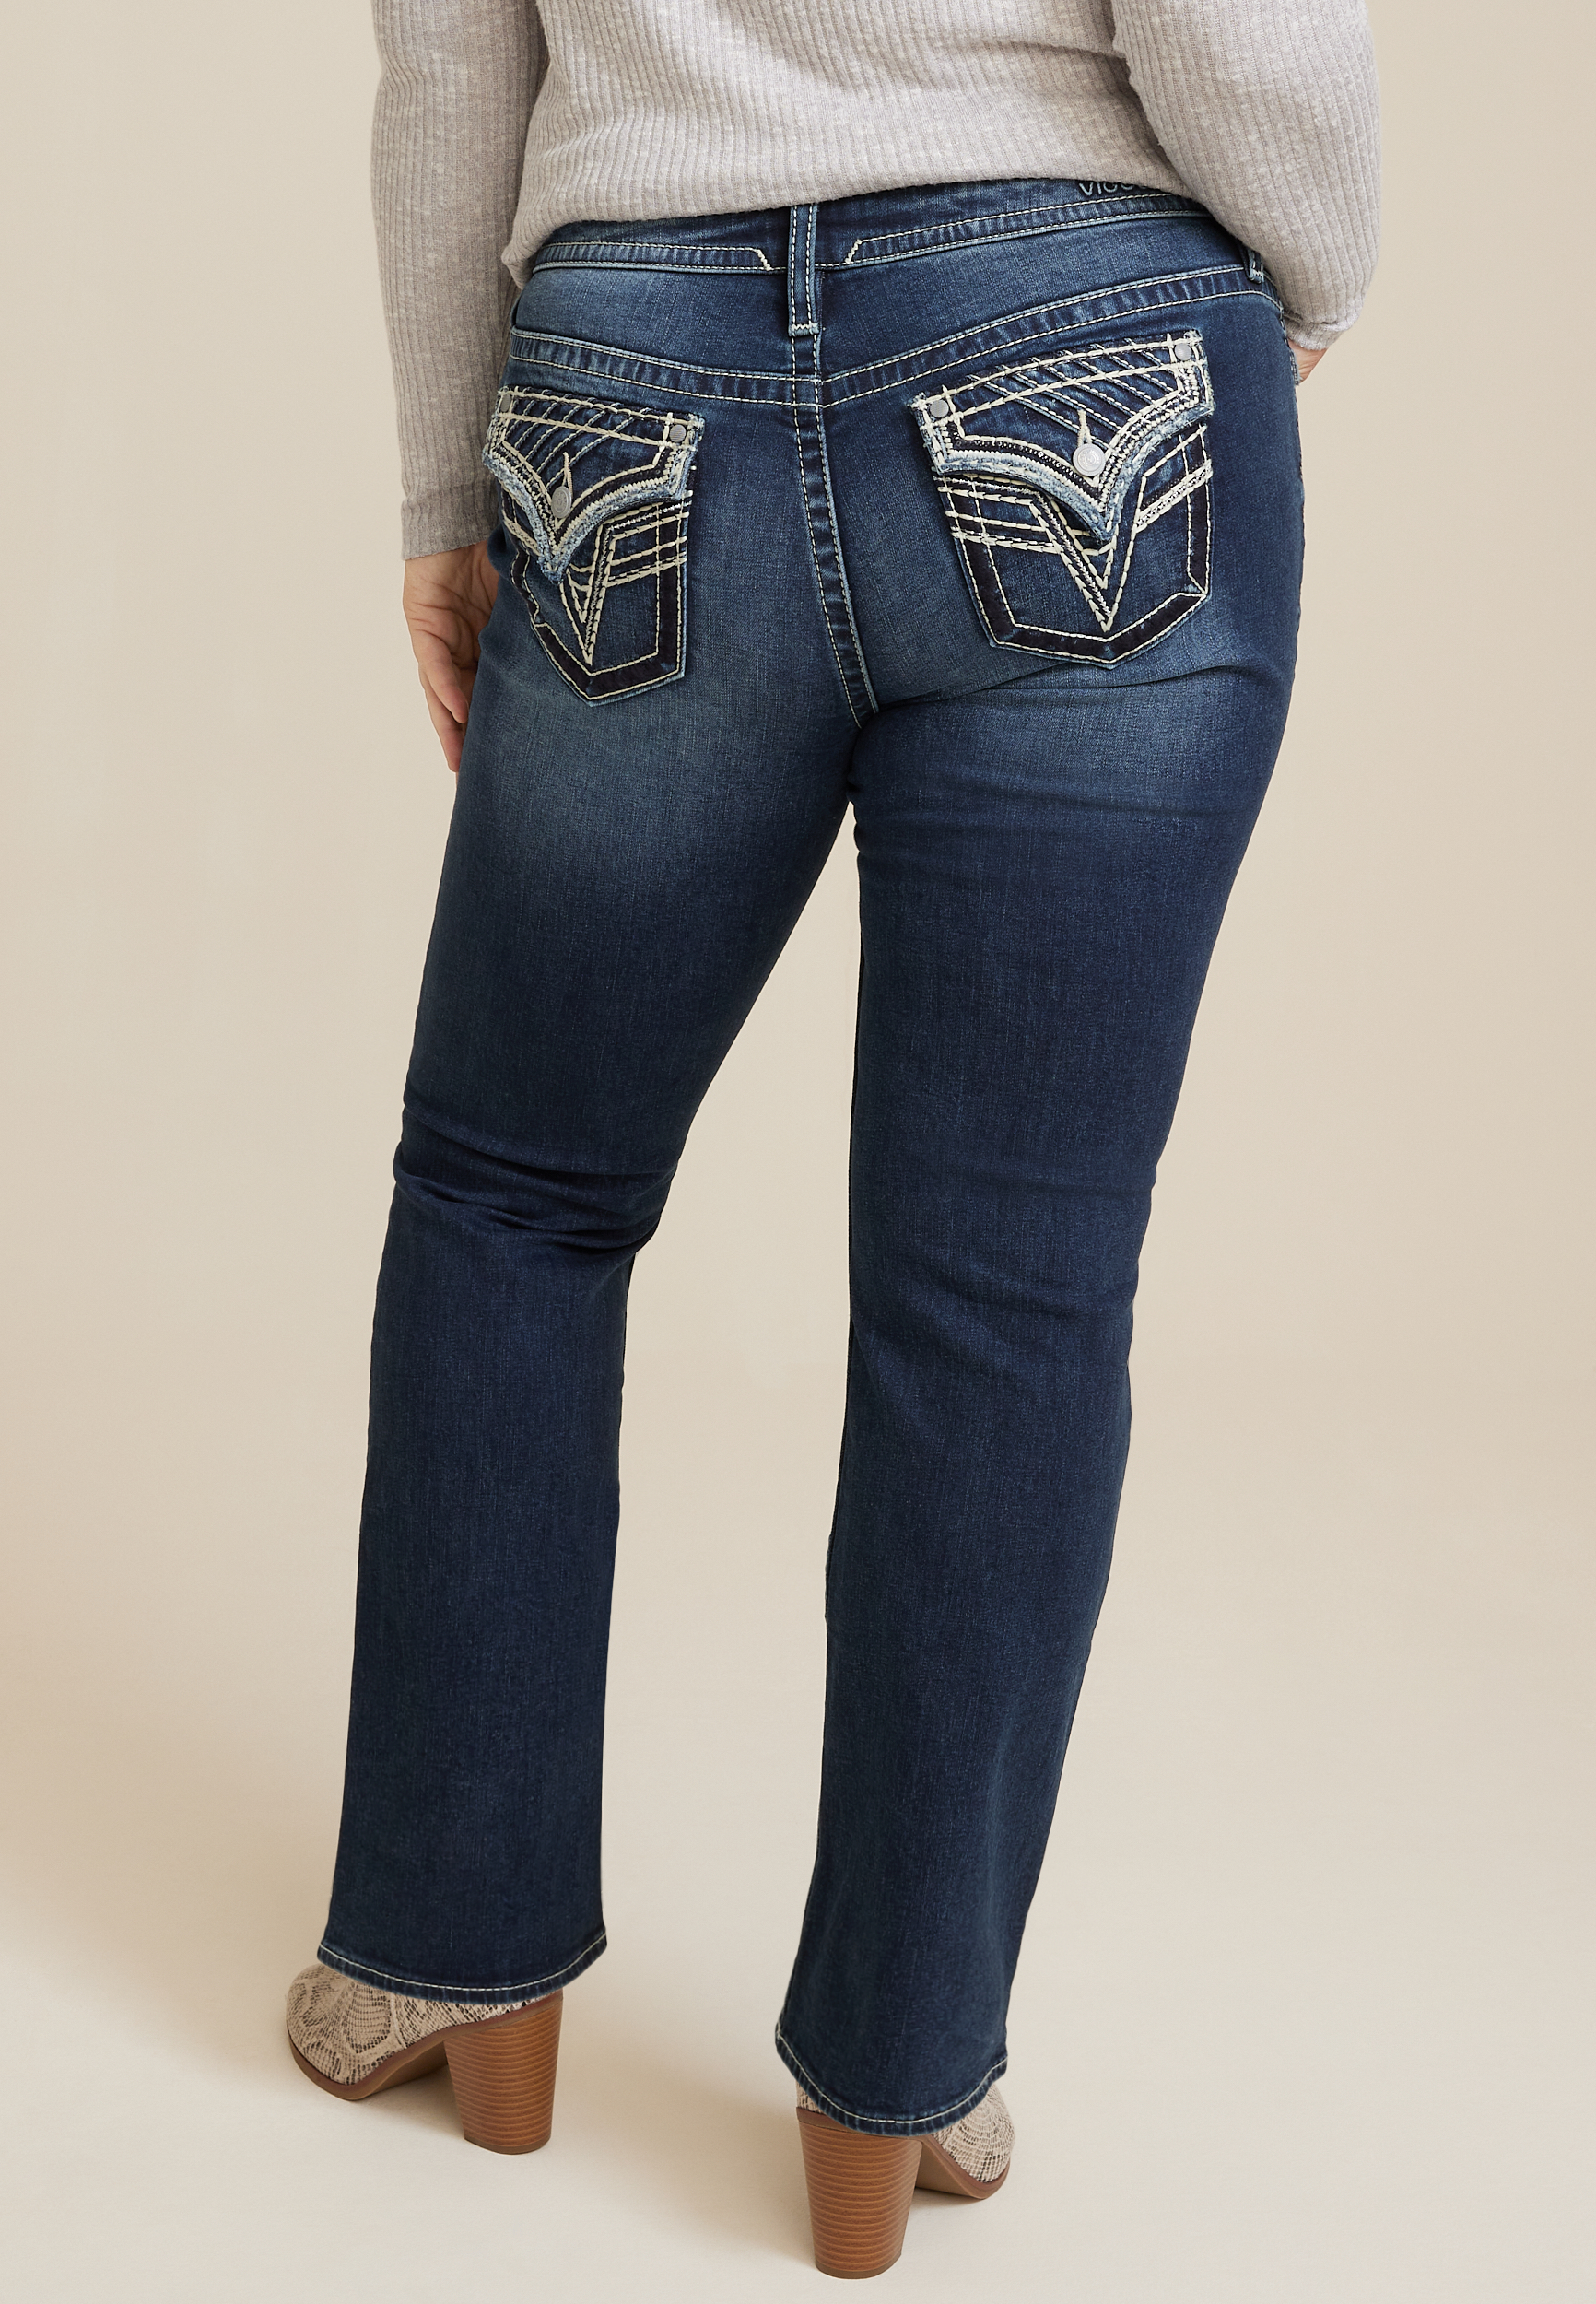 Plus Size m jeans by maurices™ Everflex™ Curvy High Rise Slim Boot Jean